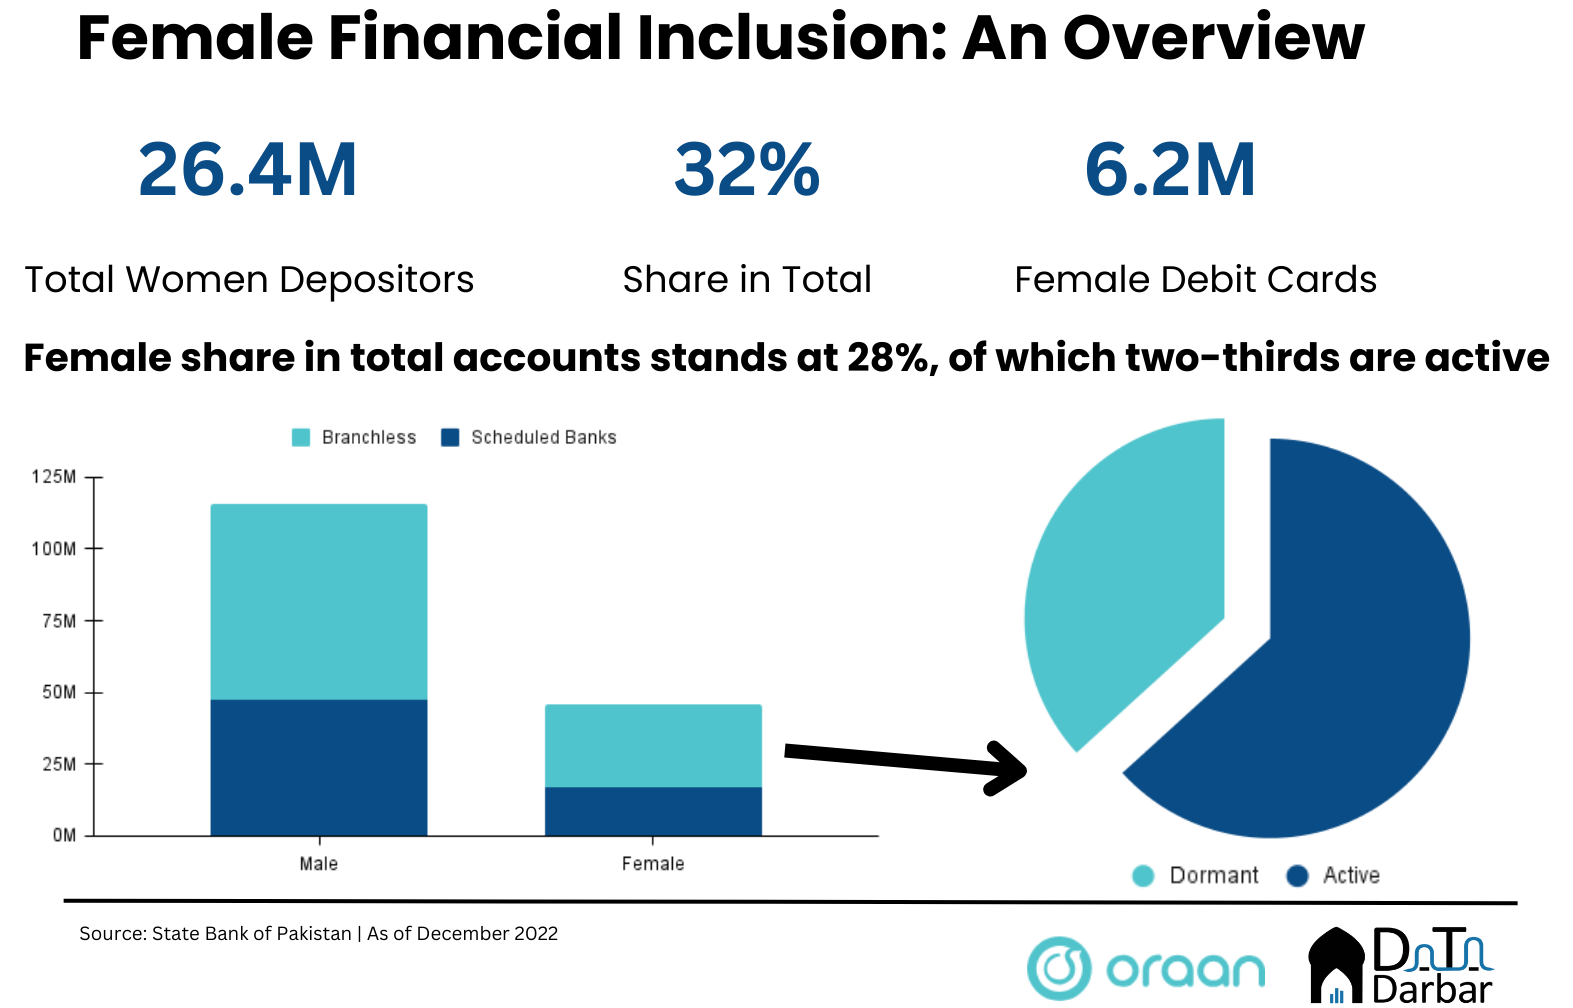 Female Financial Inclusion Overview